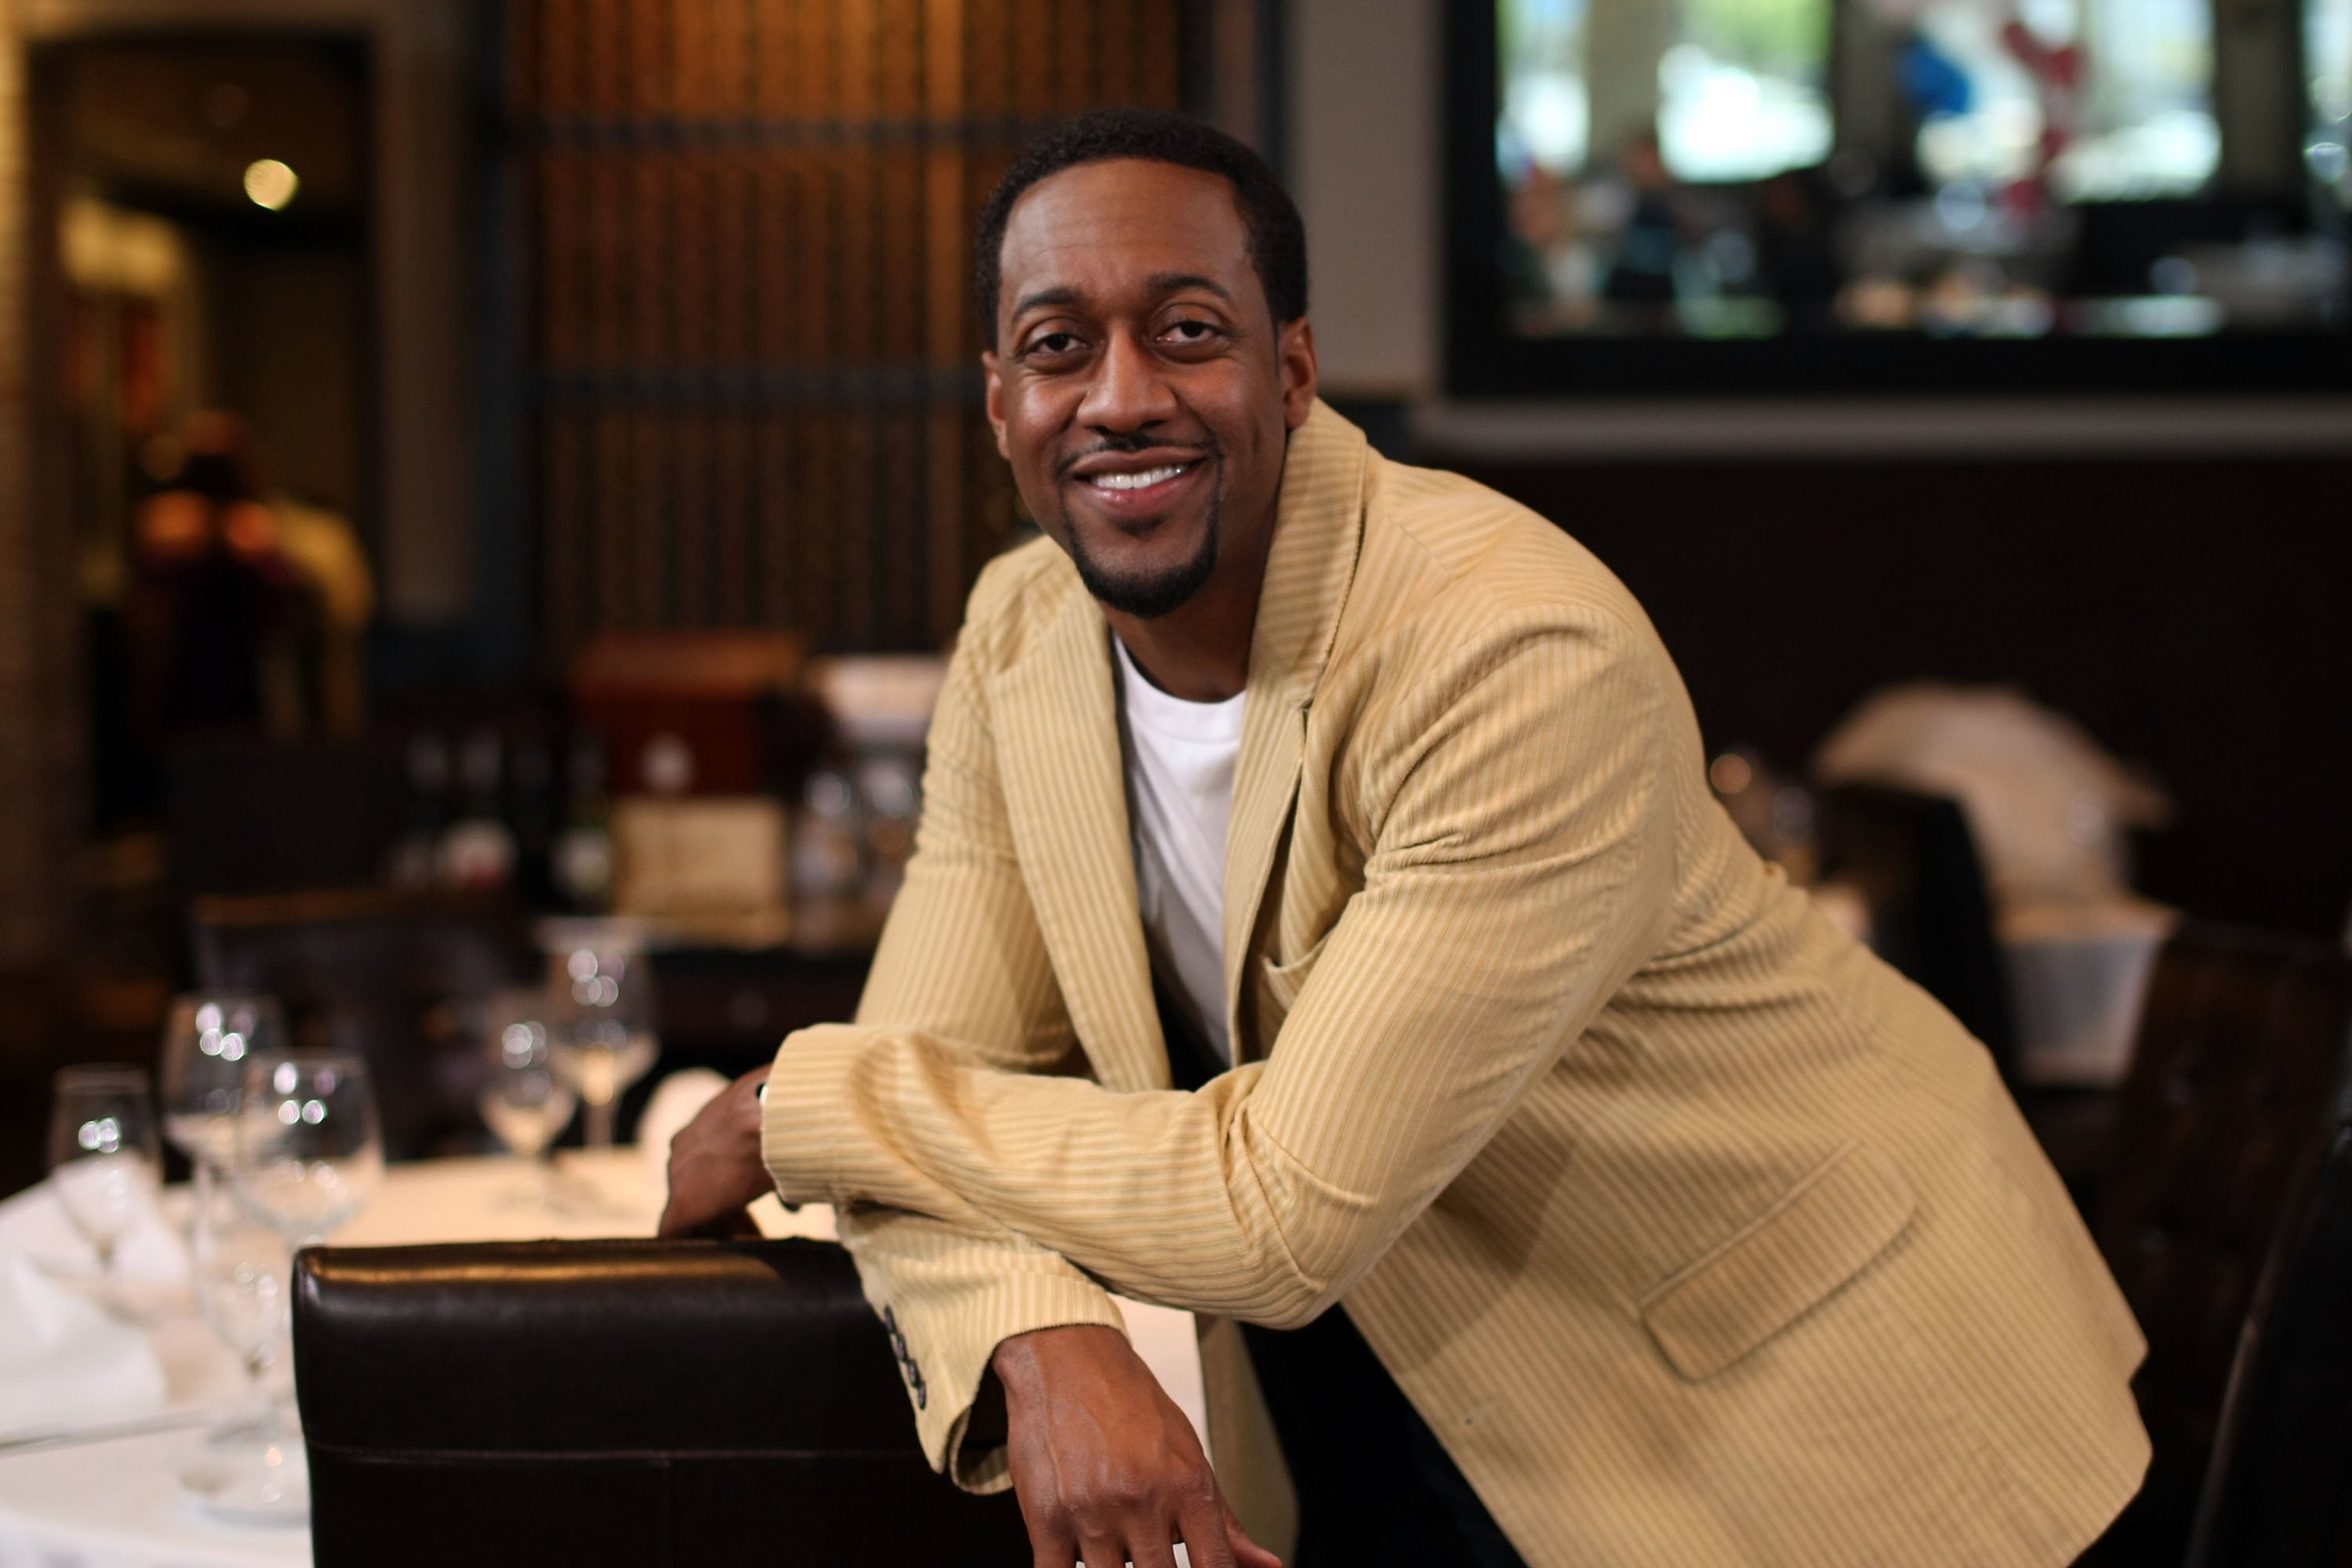 A portrait of Jaleel White at a restaurant | Source: Getty Images/GlobalImagesUkraine